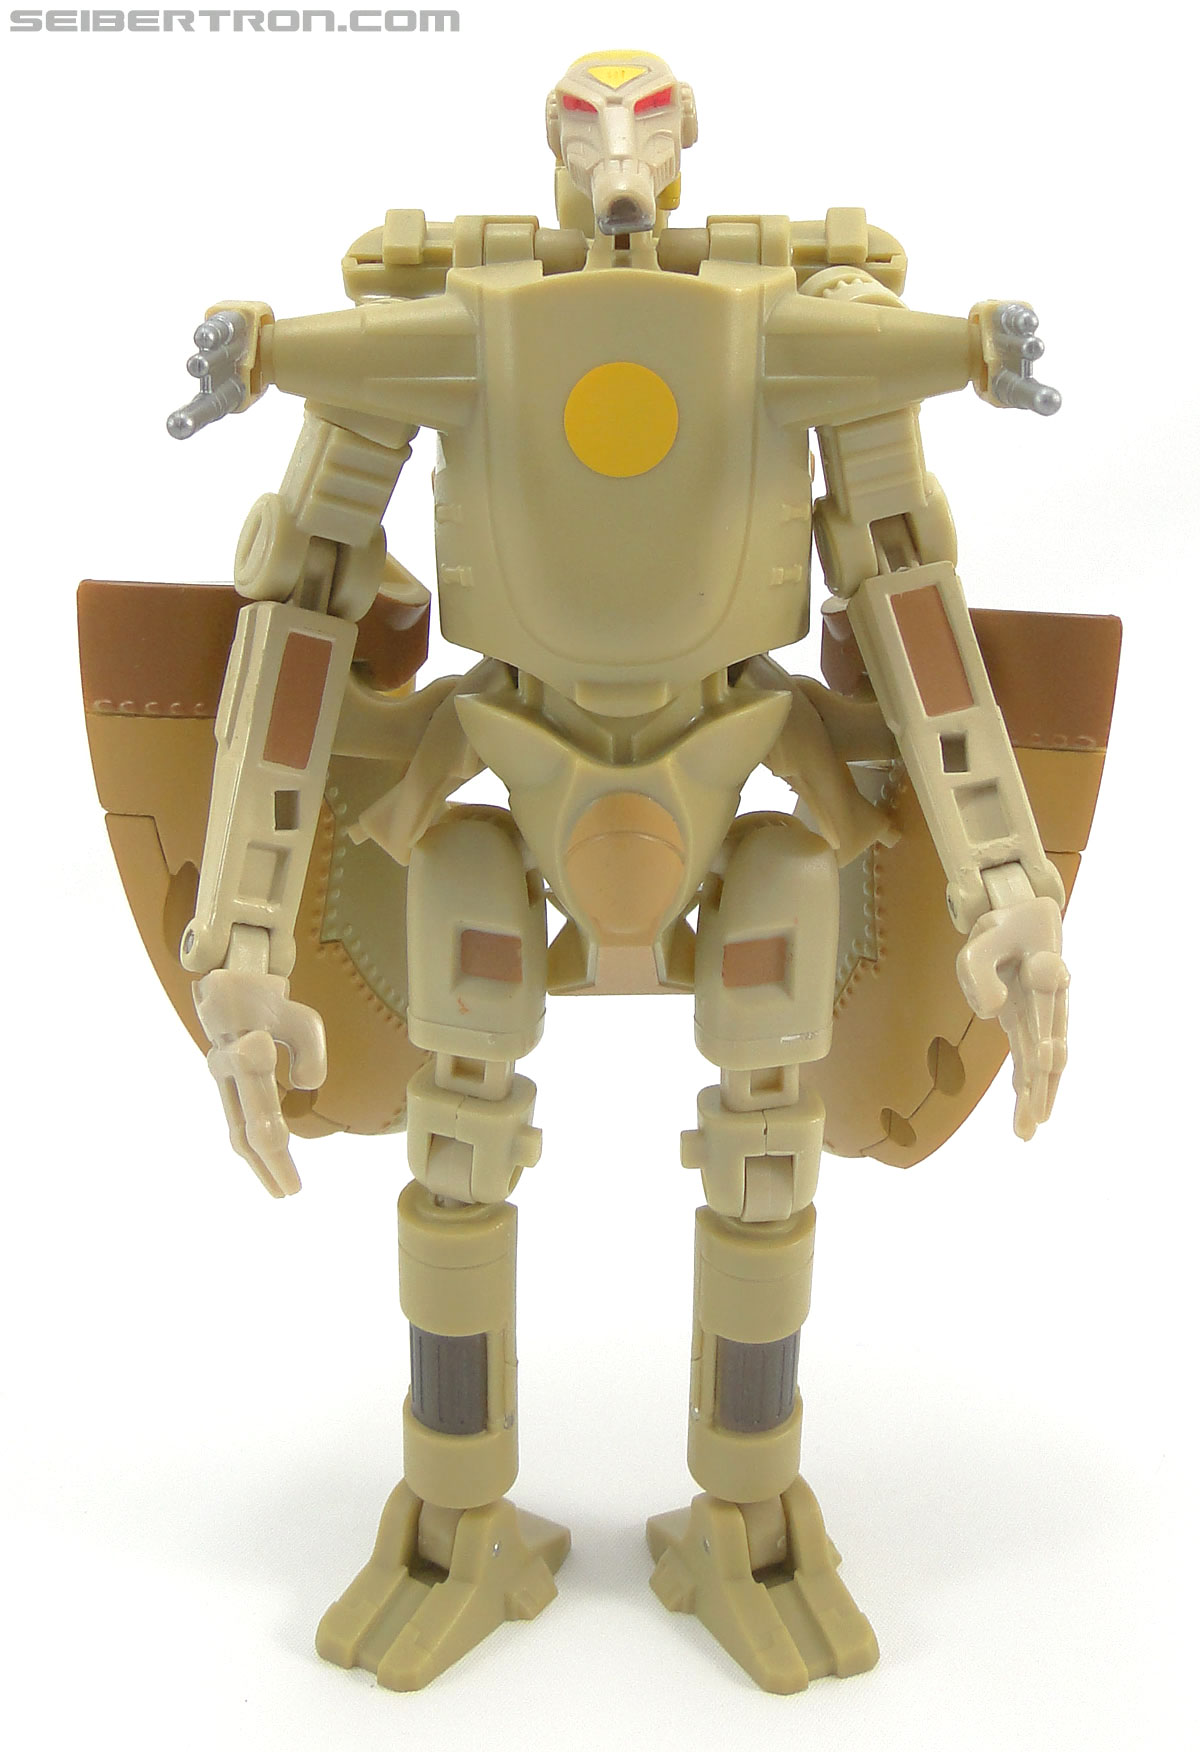 Star Wars Transformers Battle Droid Commader (Armored Assault Tank) (Battle Droid Commader) (Image #34 of 85)